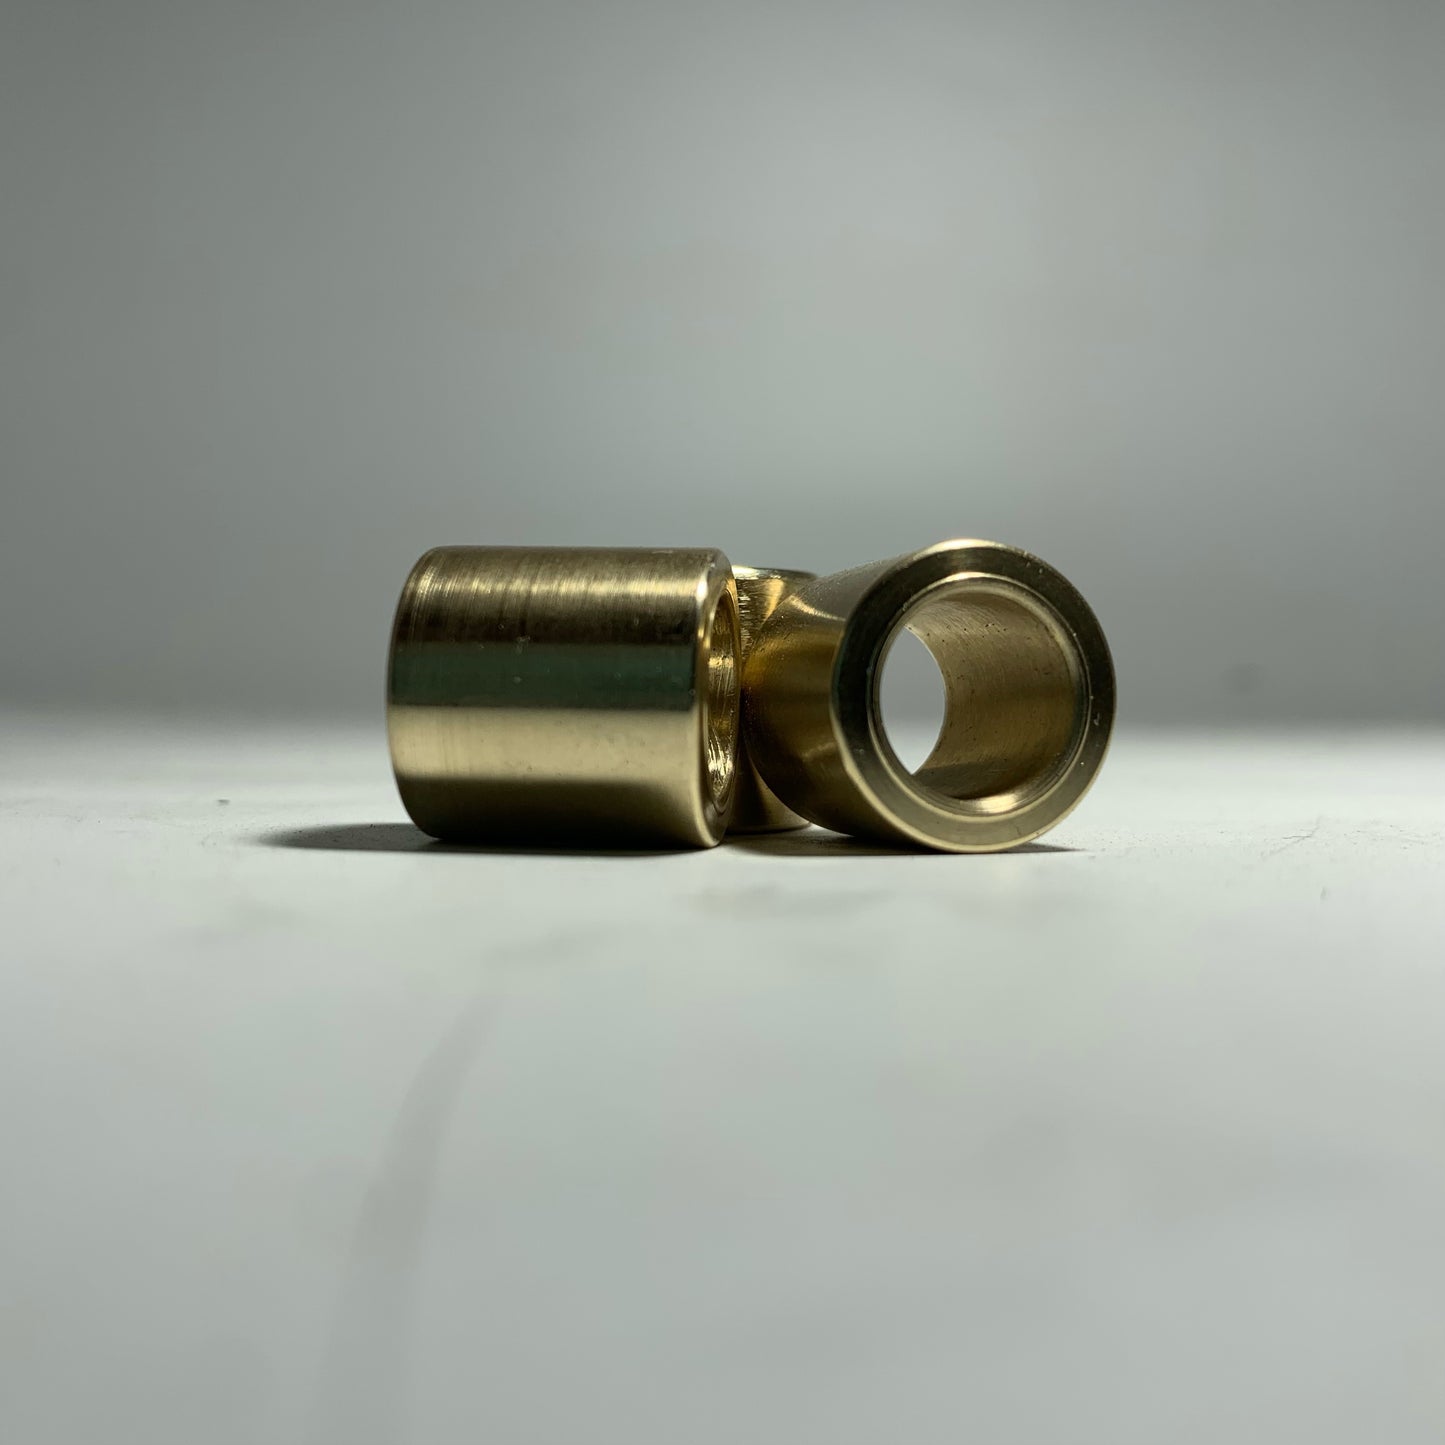 Bushing 12mm to 10mm adapter Presale